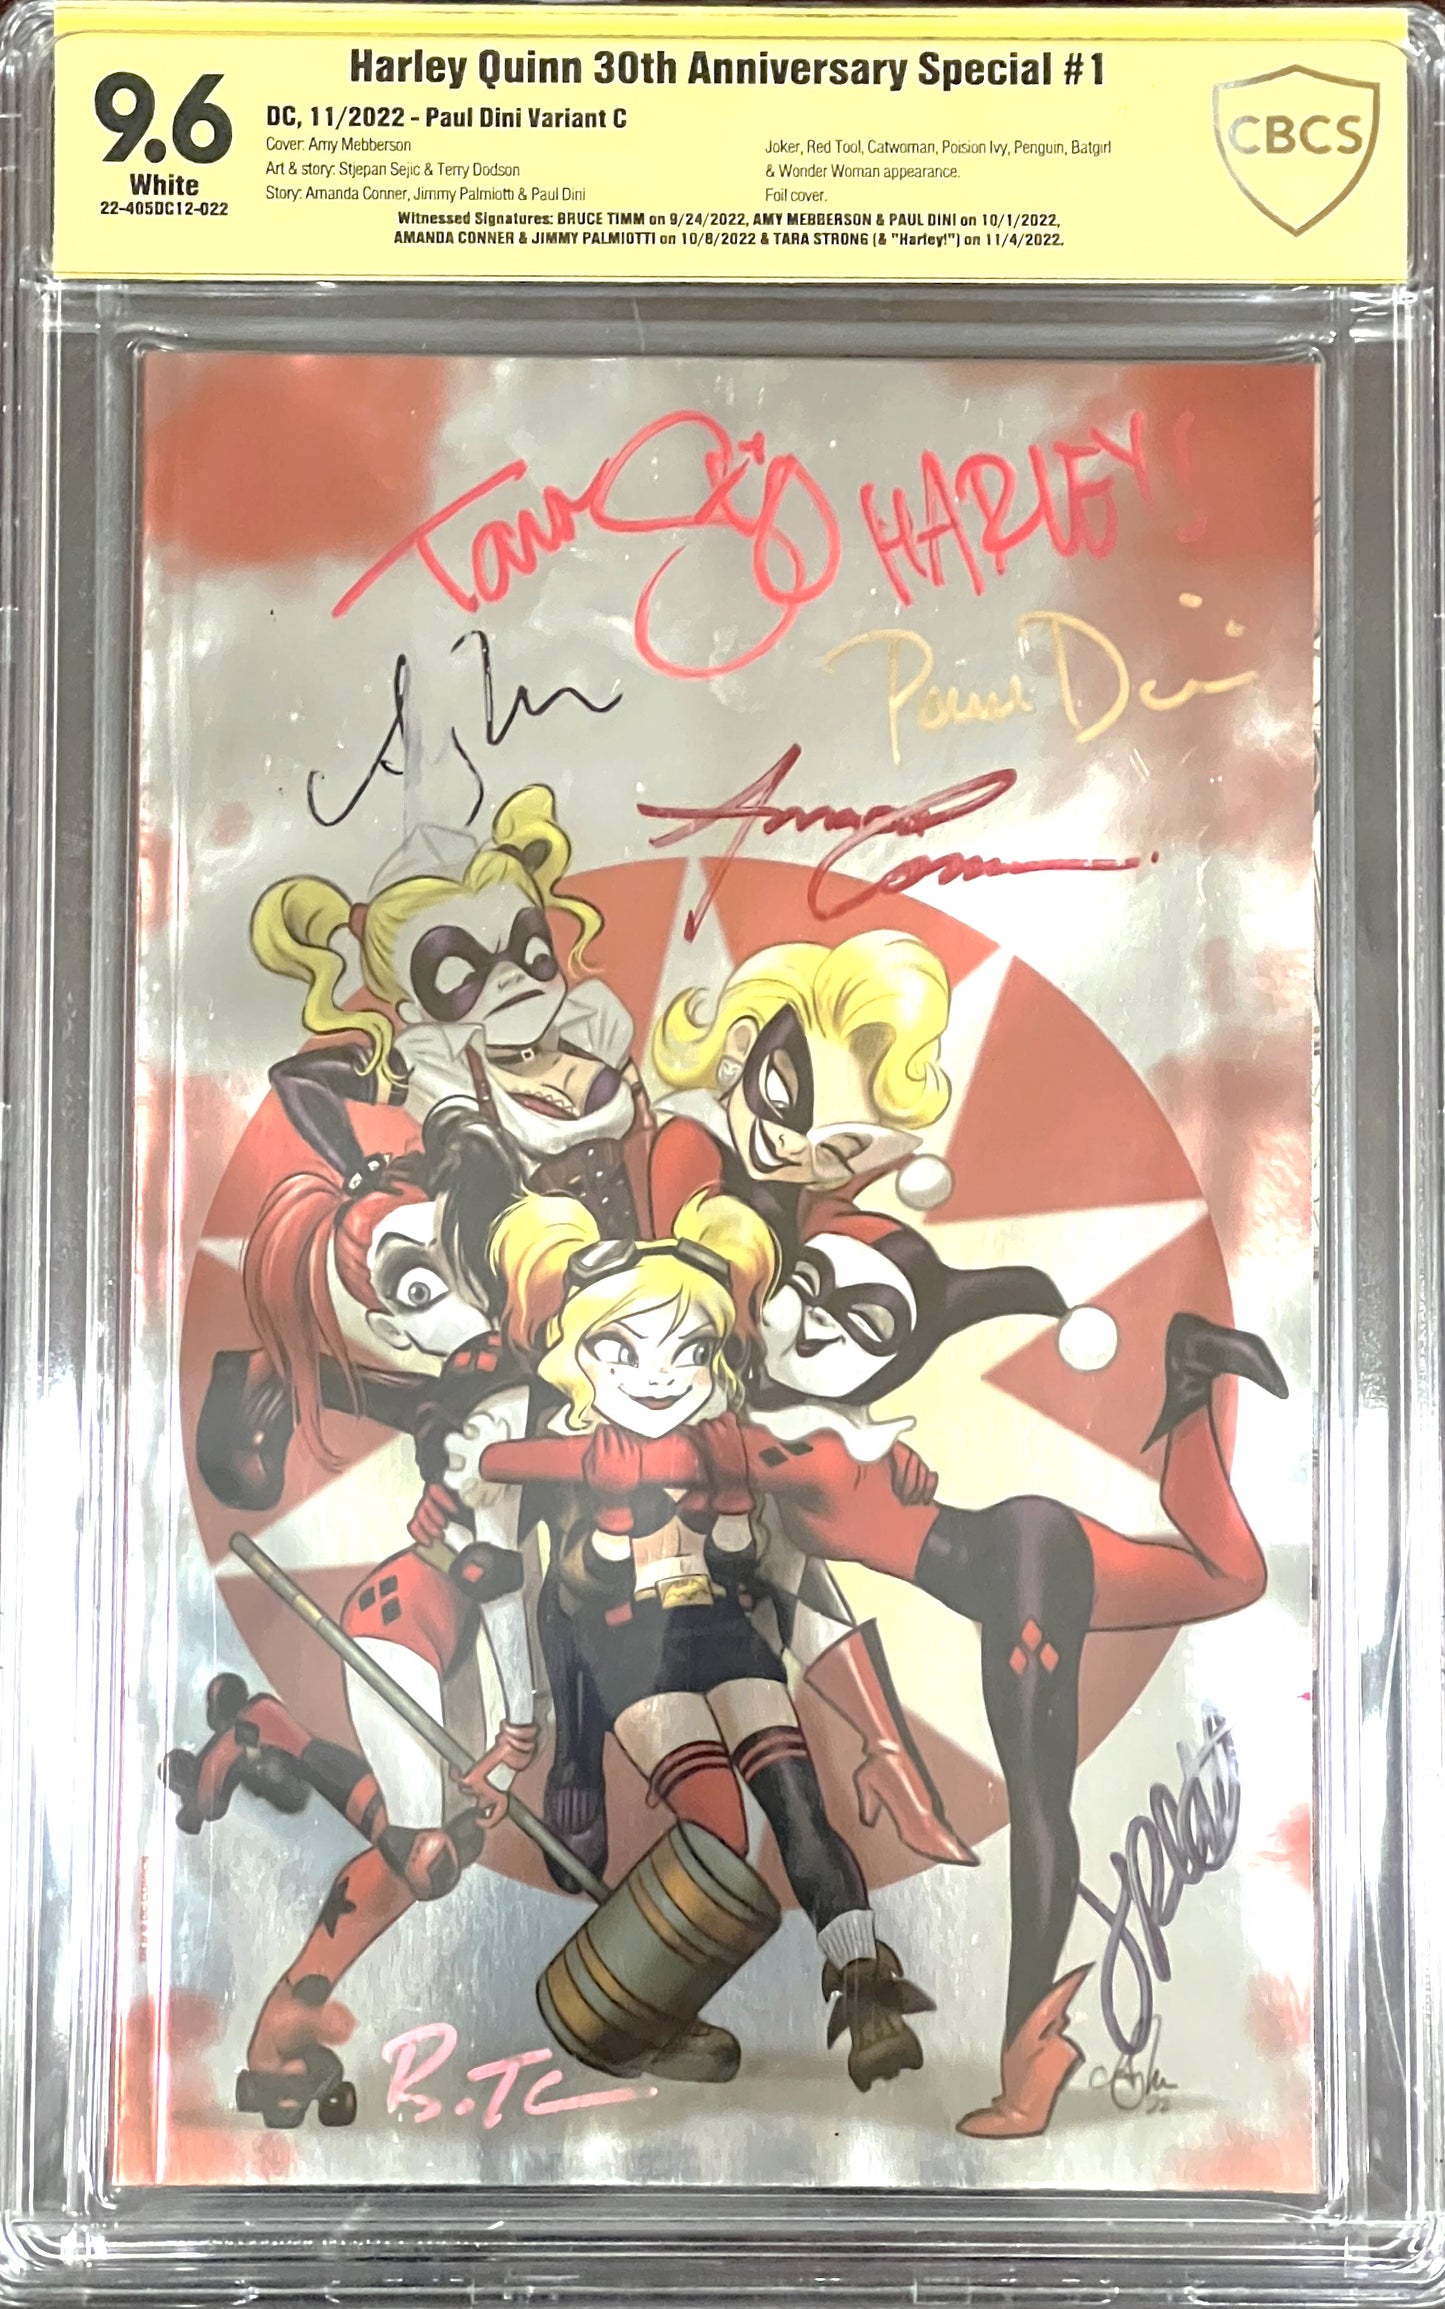 Harley Quinn 30th Anniversary Special #1. Paul Dini Variant. CBCS 9.6. Multi-signed.